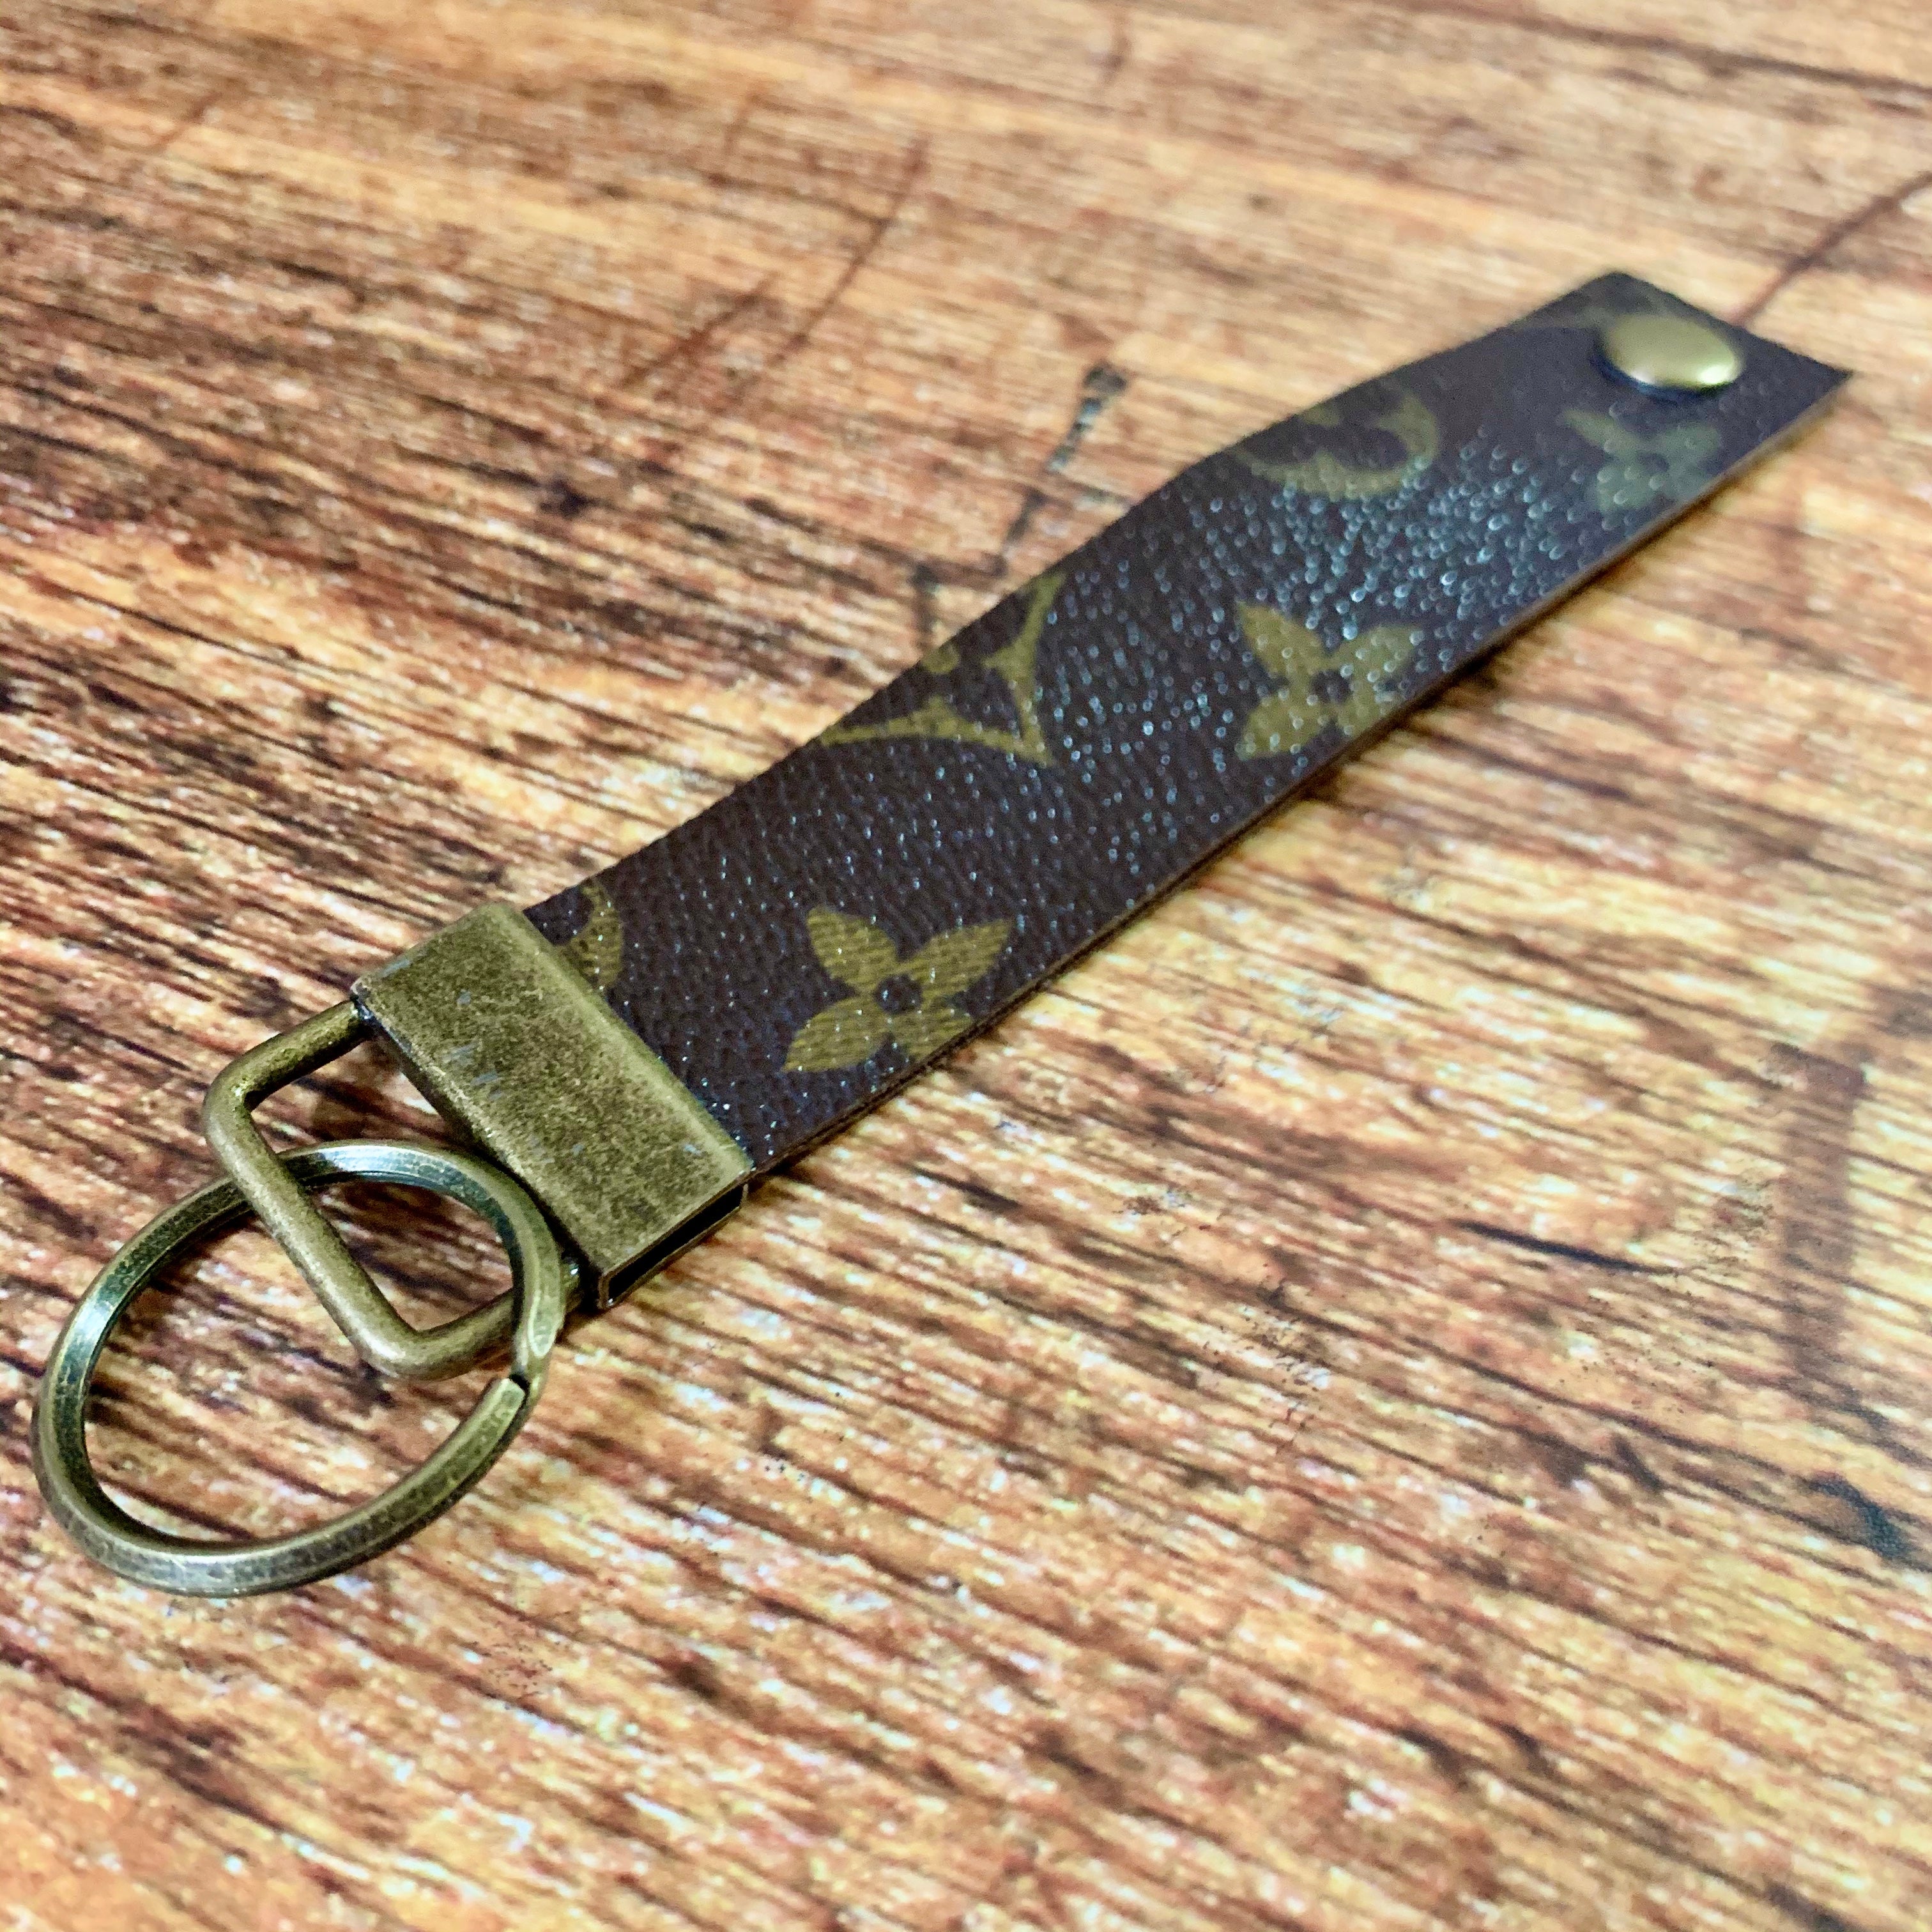 Upcycled Extra Long Louis Vuitton Leather Key Chain